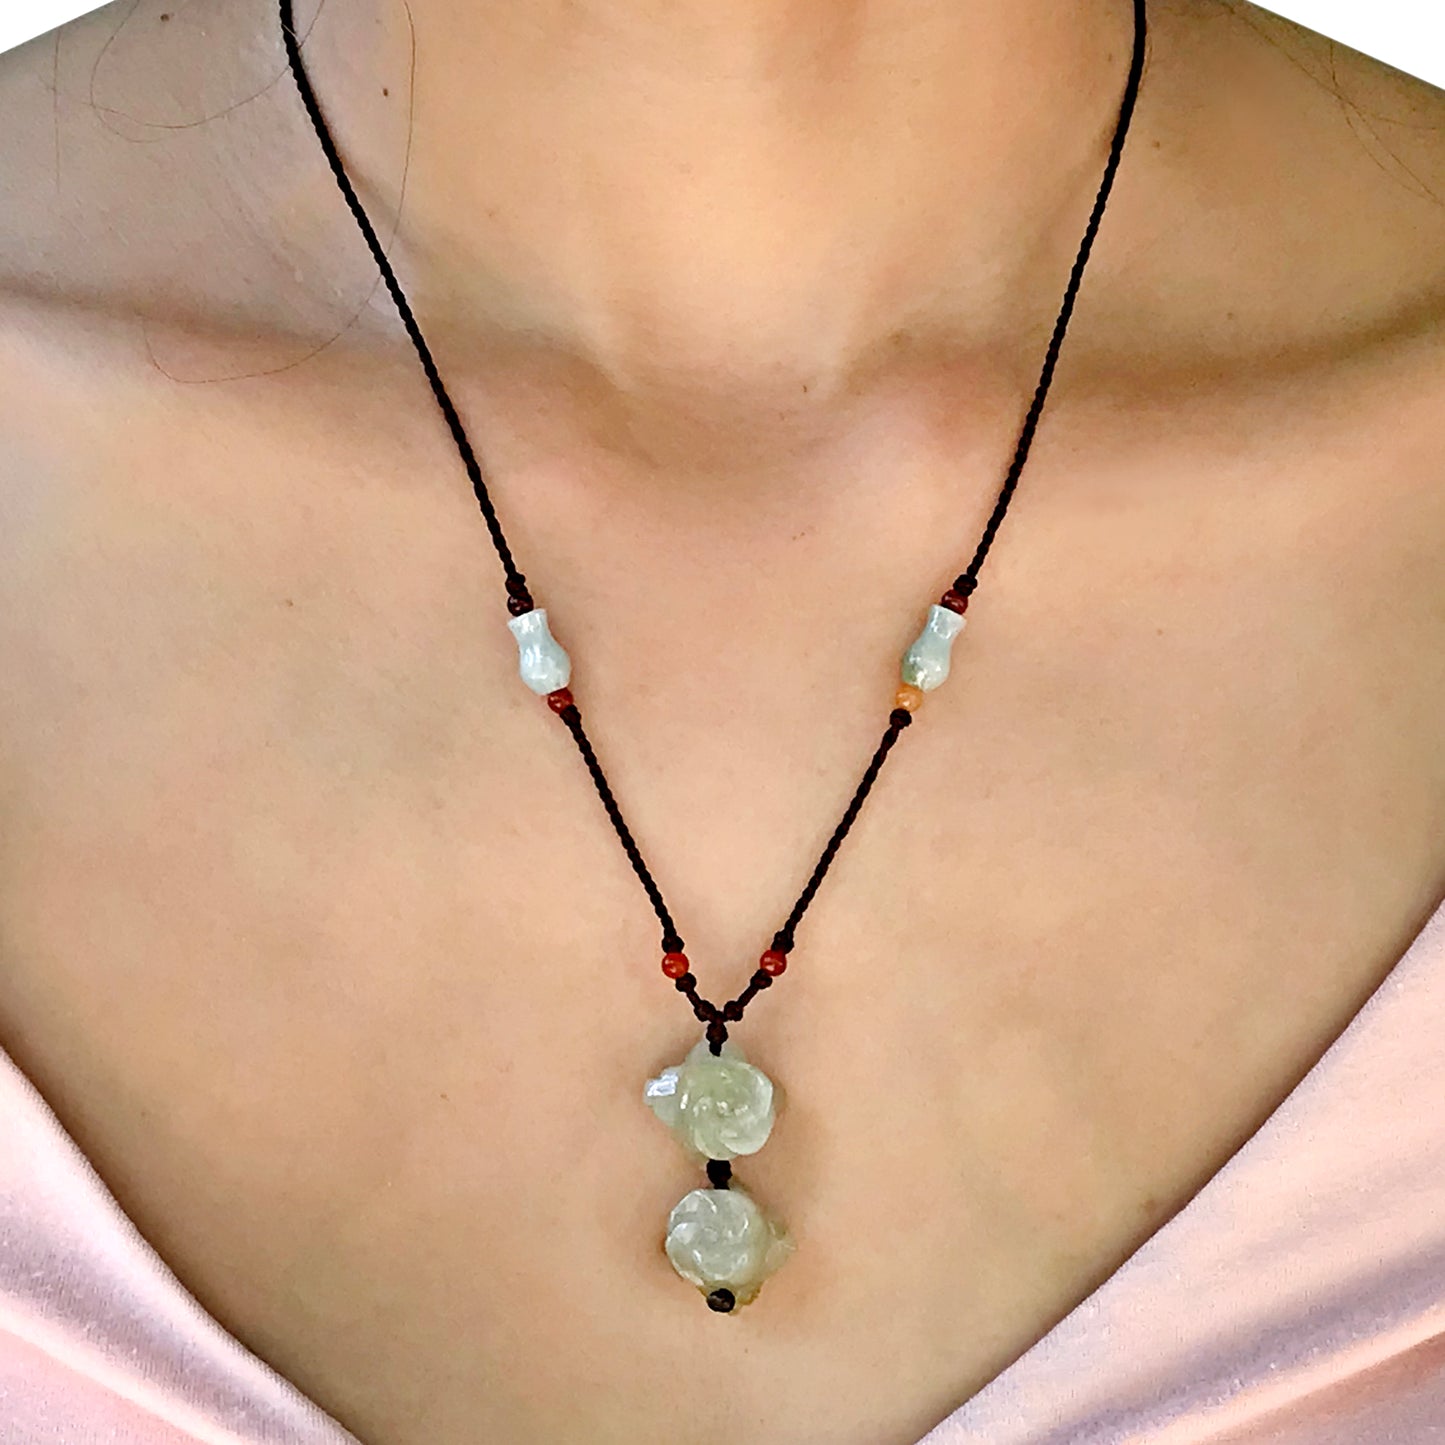 Feel the Love with Double Stacked Rose Blossom Flower Jade Necklace